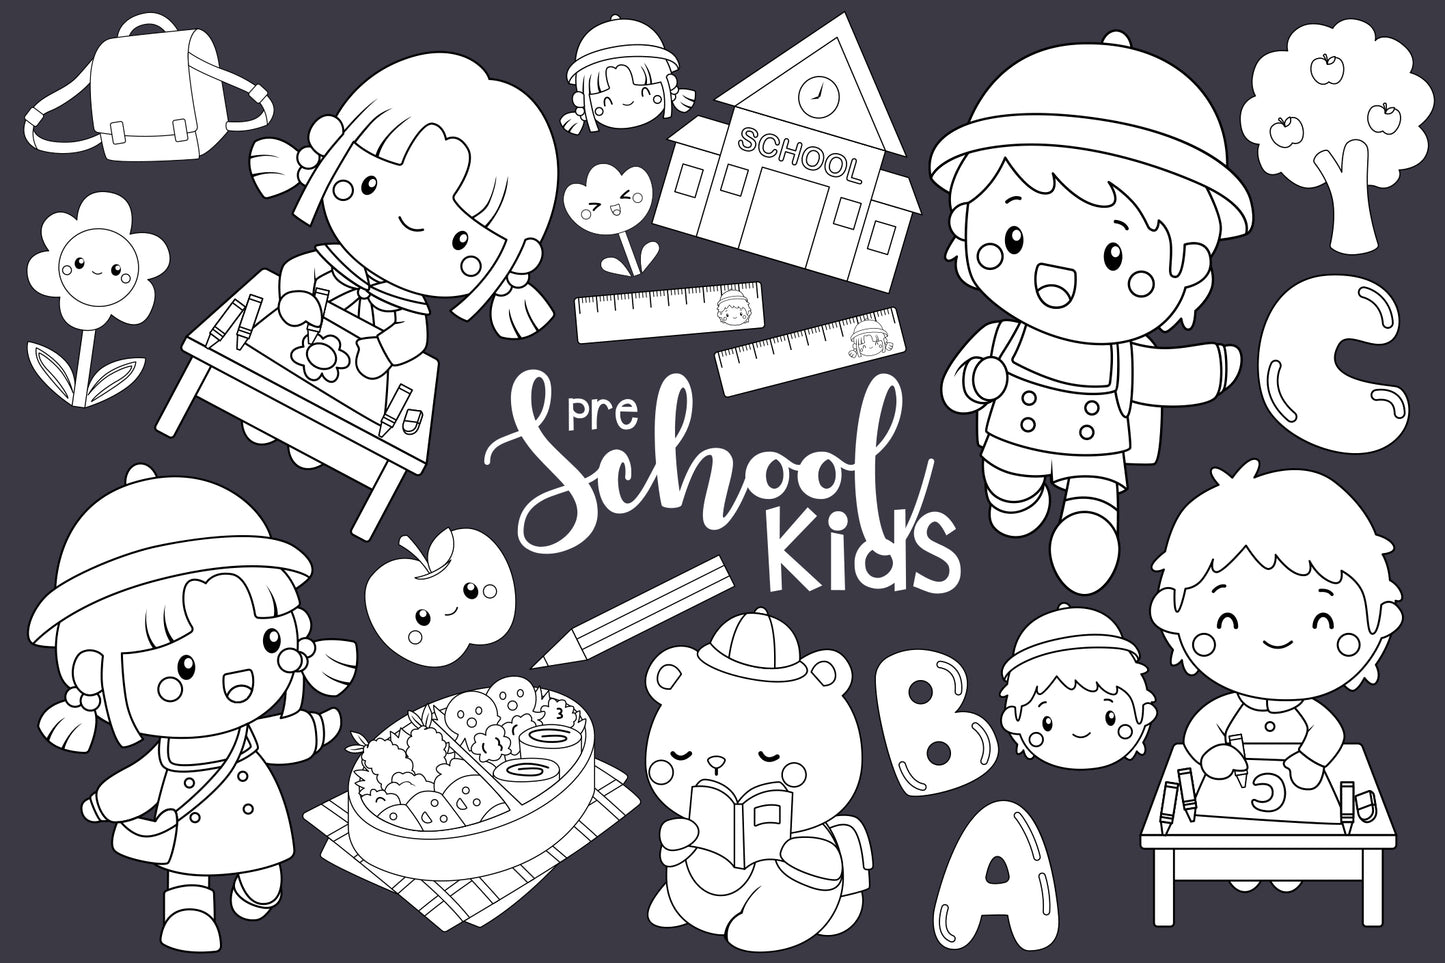 Preschool Kids Clipart - Learning and Study Coloring